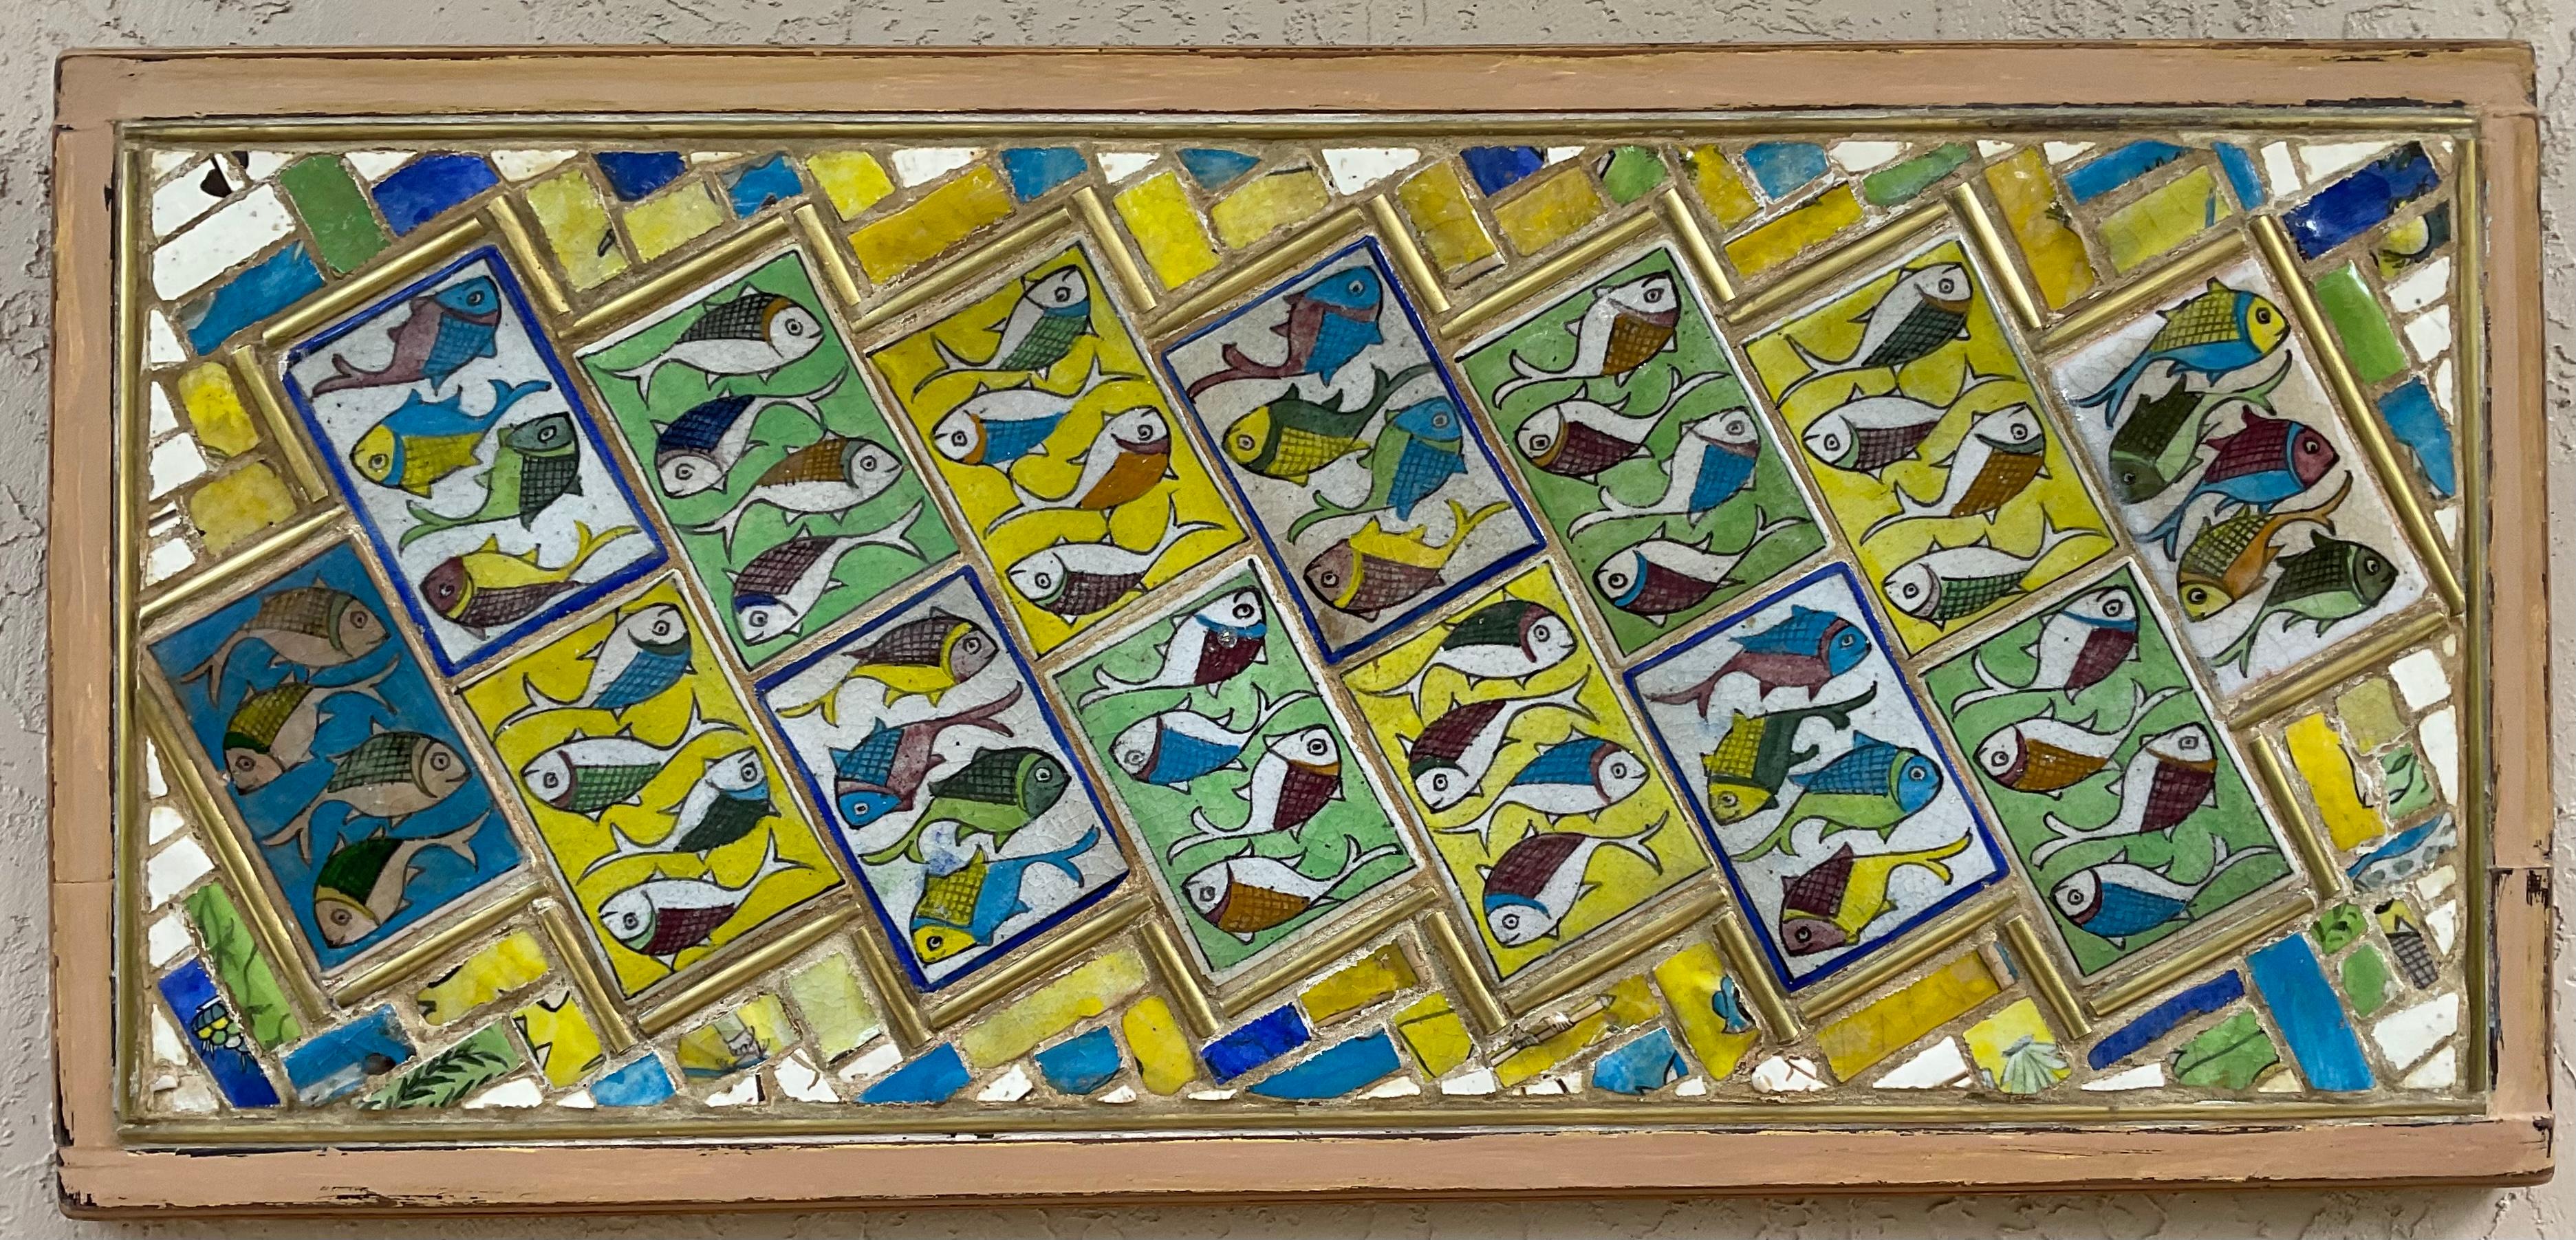 One of a kind wood wall hanging, artistically imbedded with beautiful vintage hand painted fish motif Persian ceramic tiles, surrounded with mosaic combine of, brass, 19 century Chinese ceramic fragments and vintage Persian tile fragments, all